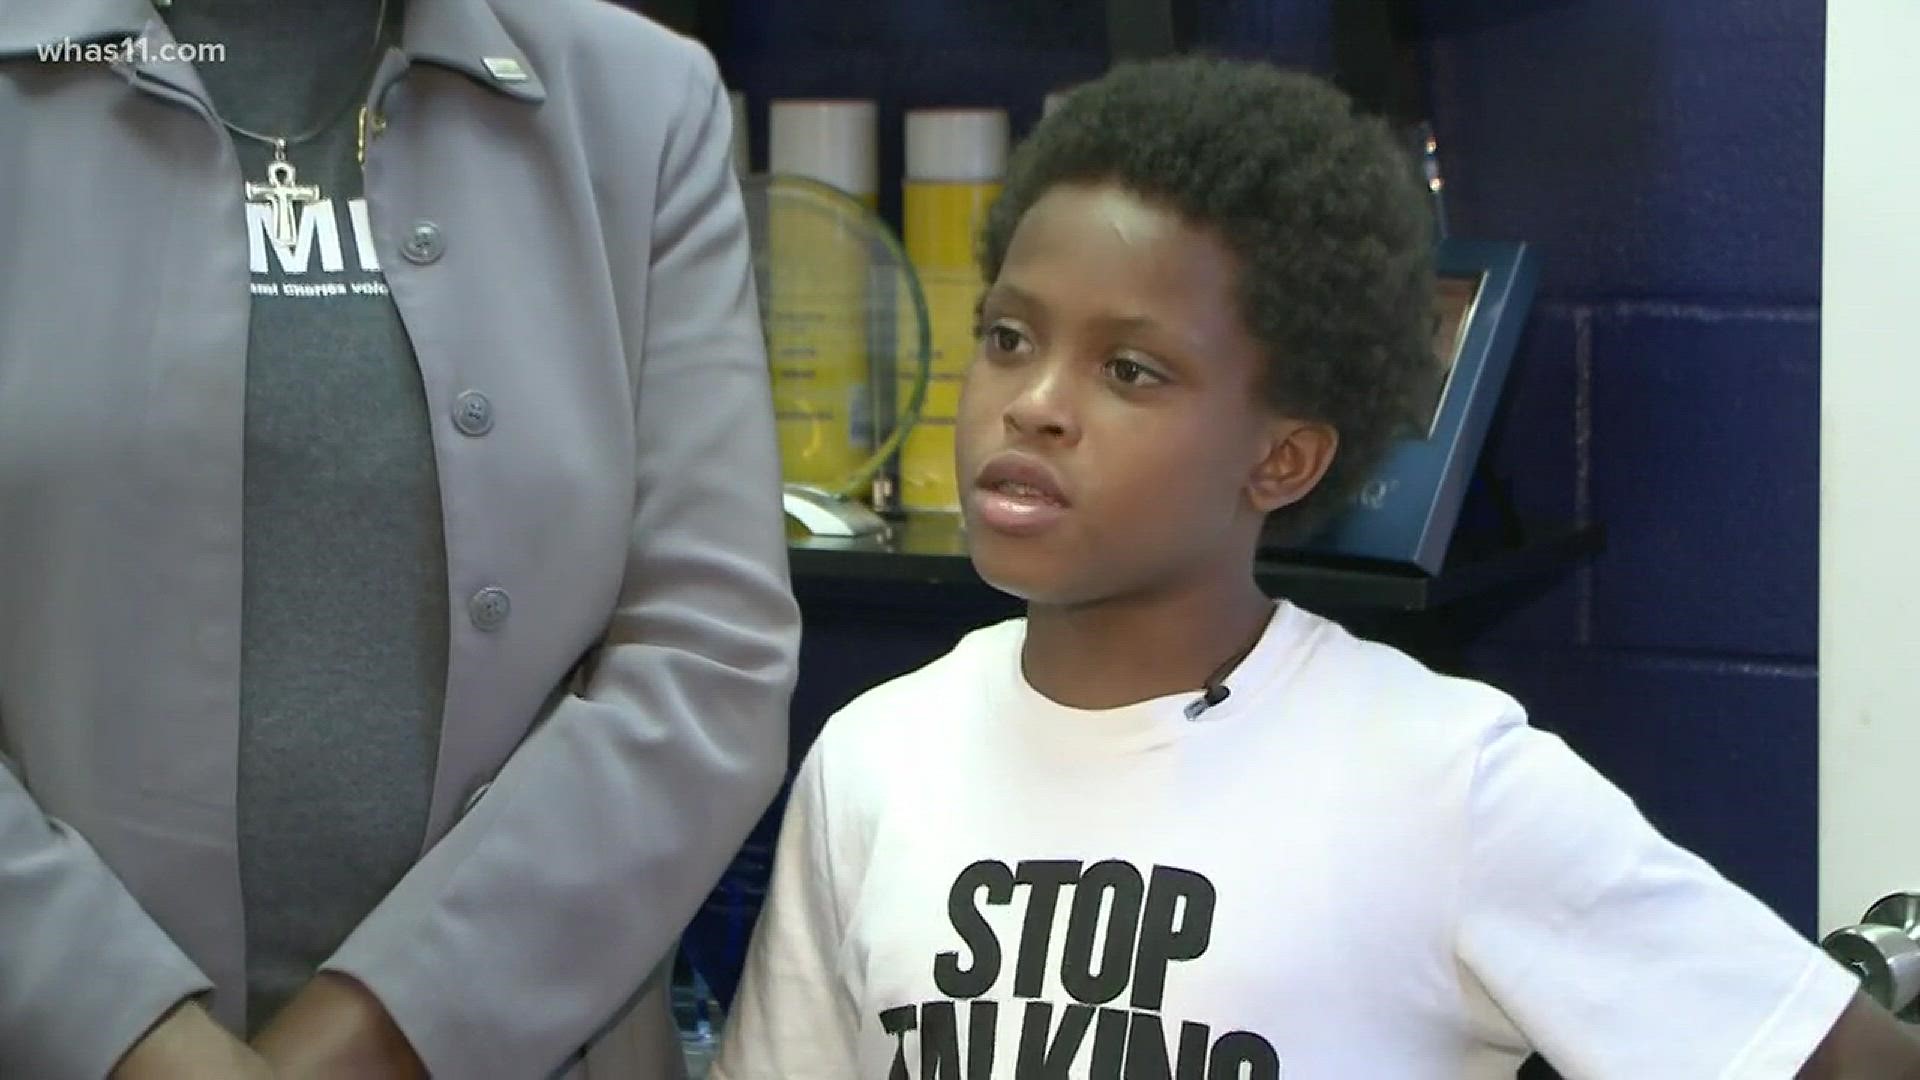 The parents of 10-year-old Seven Bridges are blaming bullying after the 5th grader took his own life.